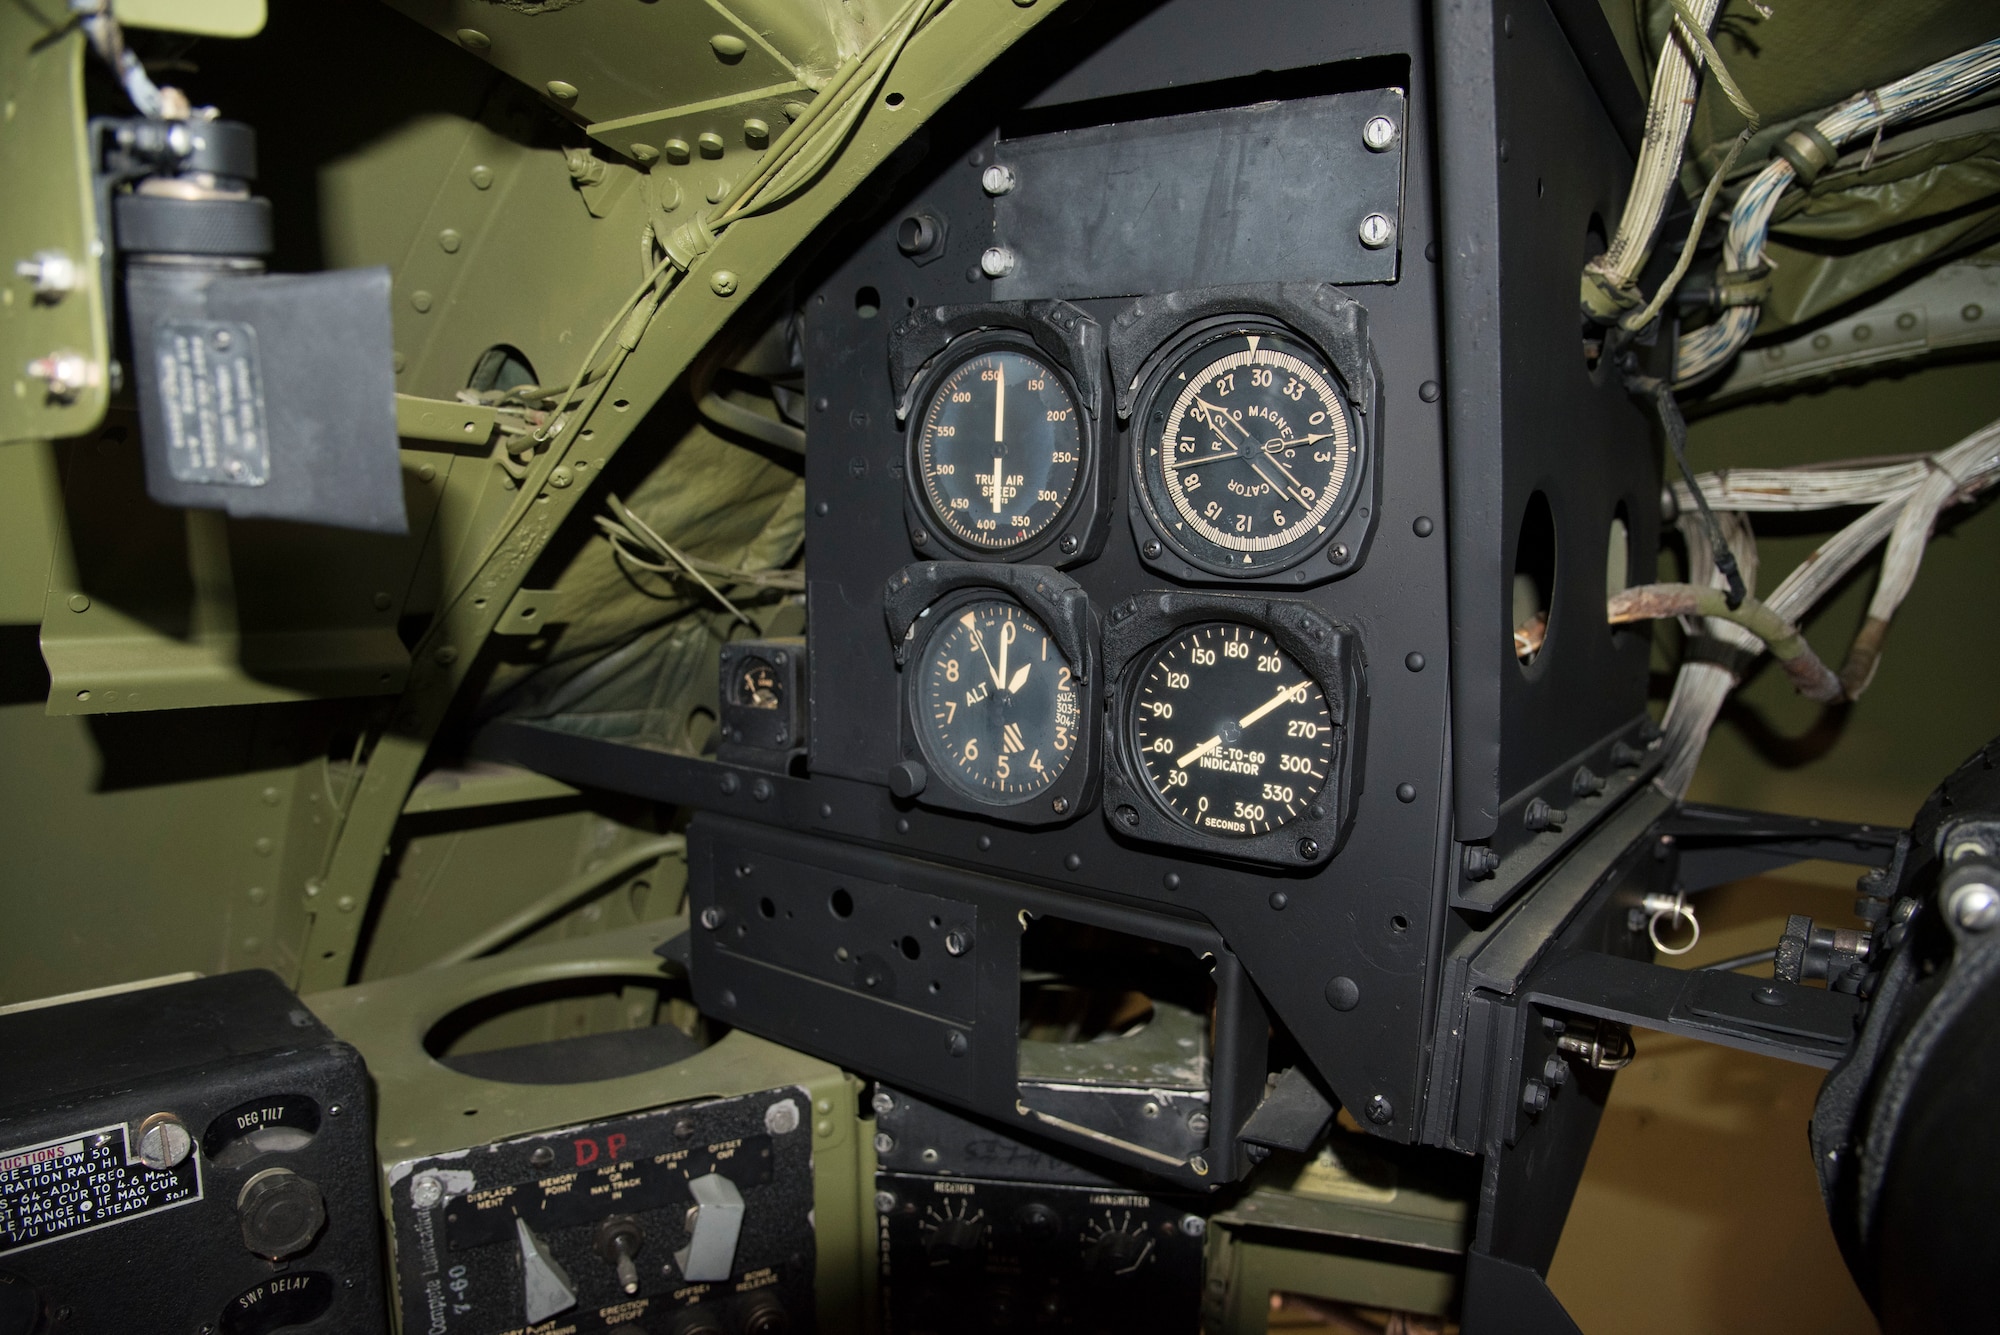 DAYTON, Ohio -- Boeing RB-47H Stratojet navigator controls at the National Museum of the United States Air Force. (U.S. Air Force photo by Ken LaRock)